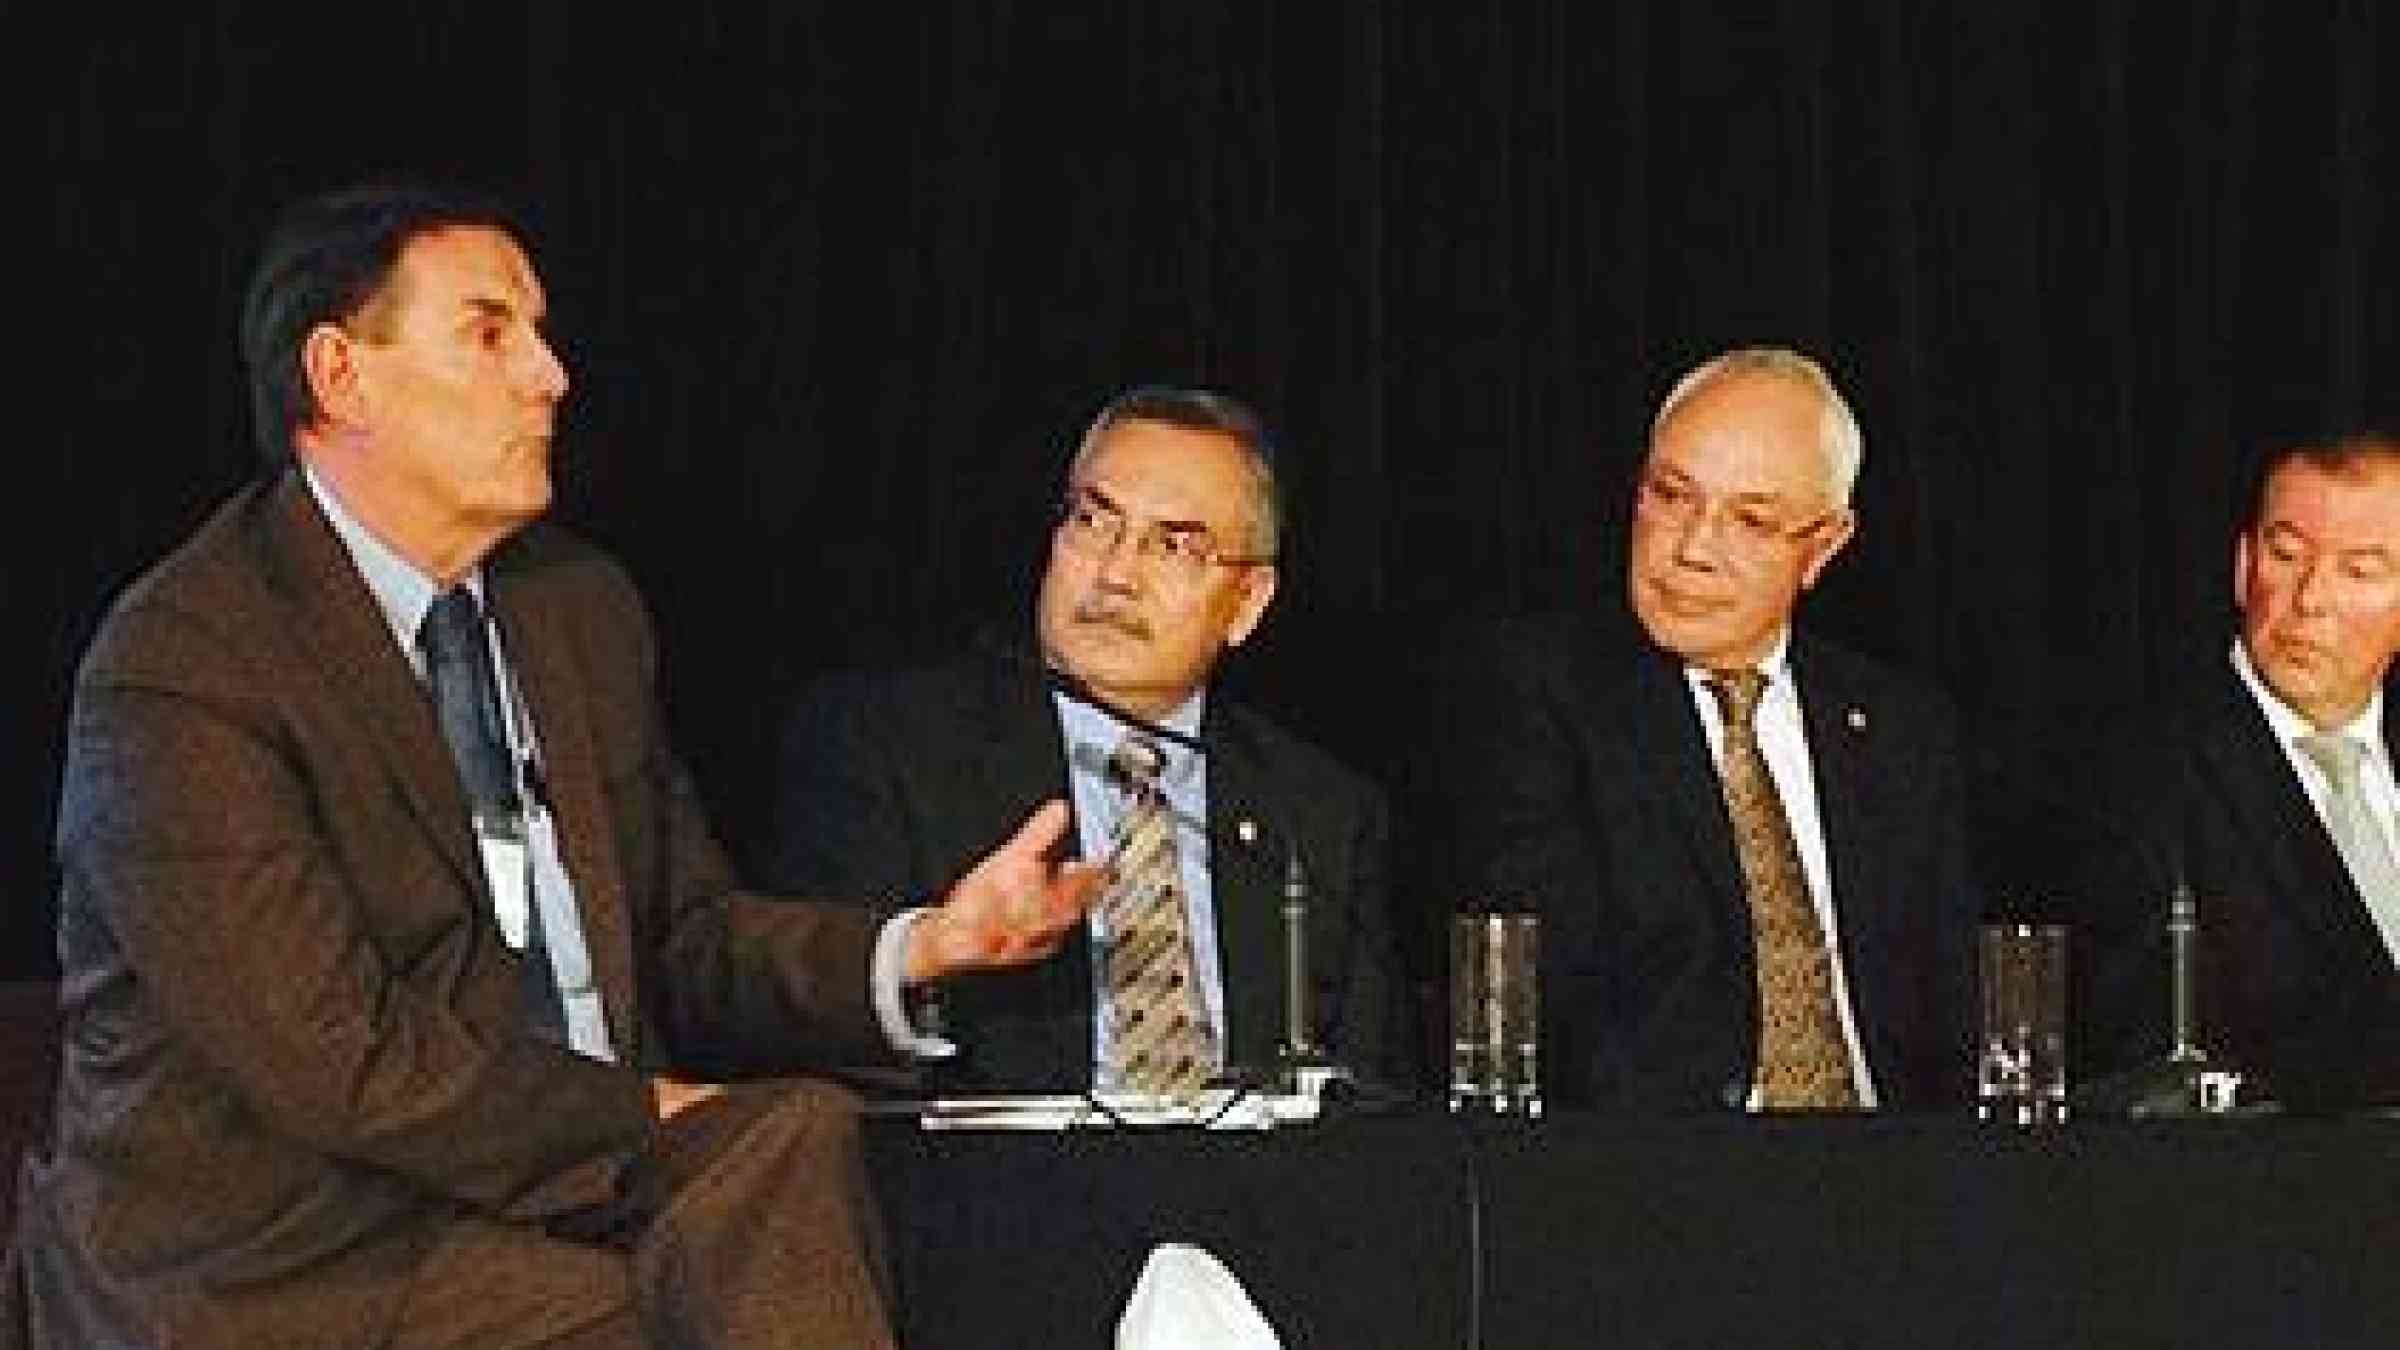 (from left to right) Panel discussion at today's session of New Zealand's first disaster communications conference: Denis McClean, Head of Communications, UNISDR; Robert Jensen, Homeland Security, USA; Sir Bob Parker, former Mayor of Christchurch, New Zealand; and Mark Crosweller, Director-General, Emergency Management, Australia. (Photo: UNISDR)